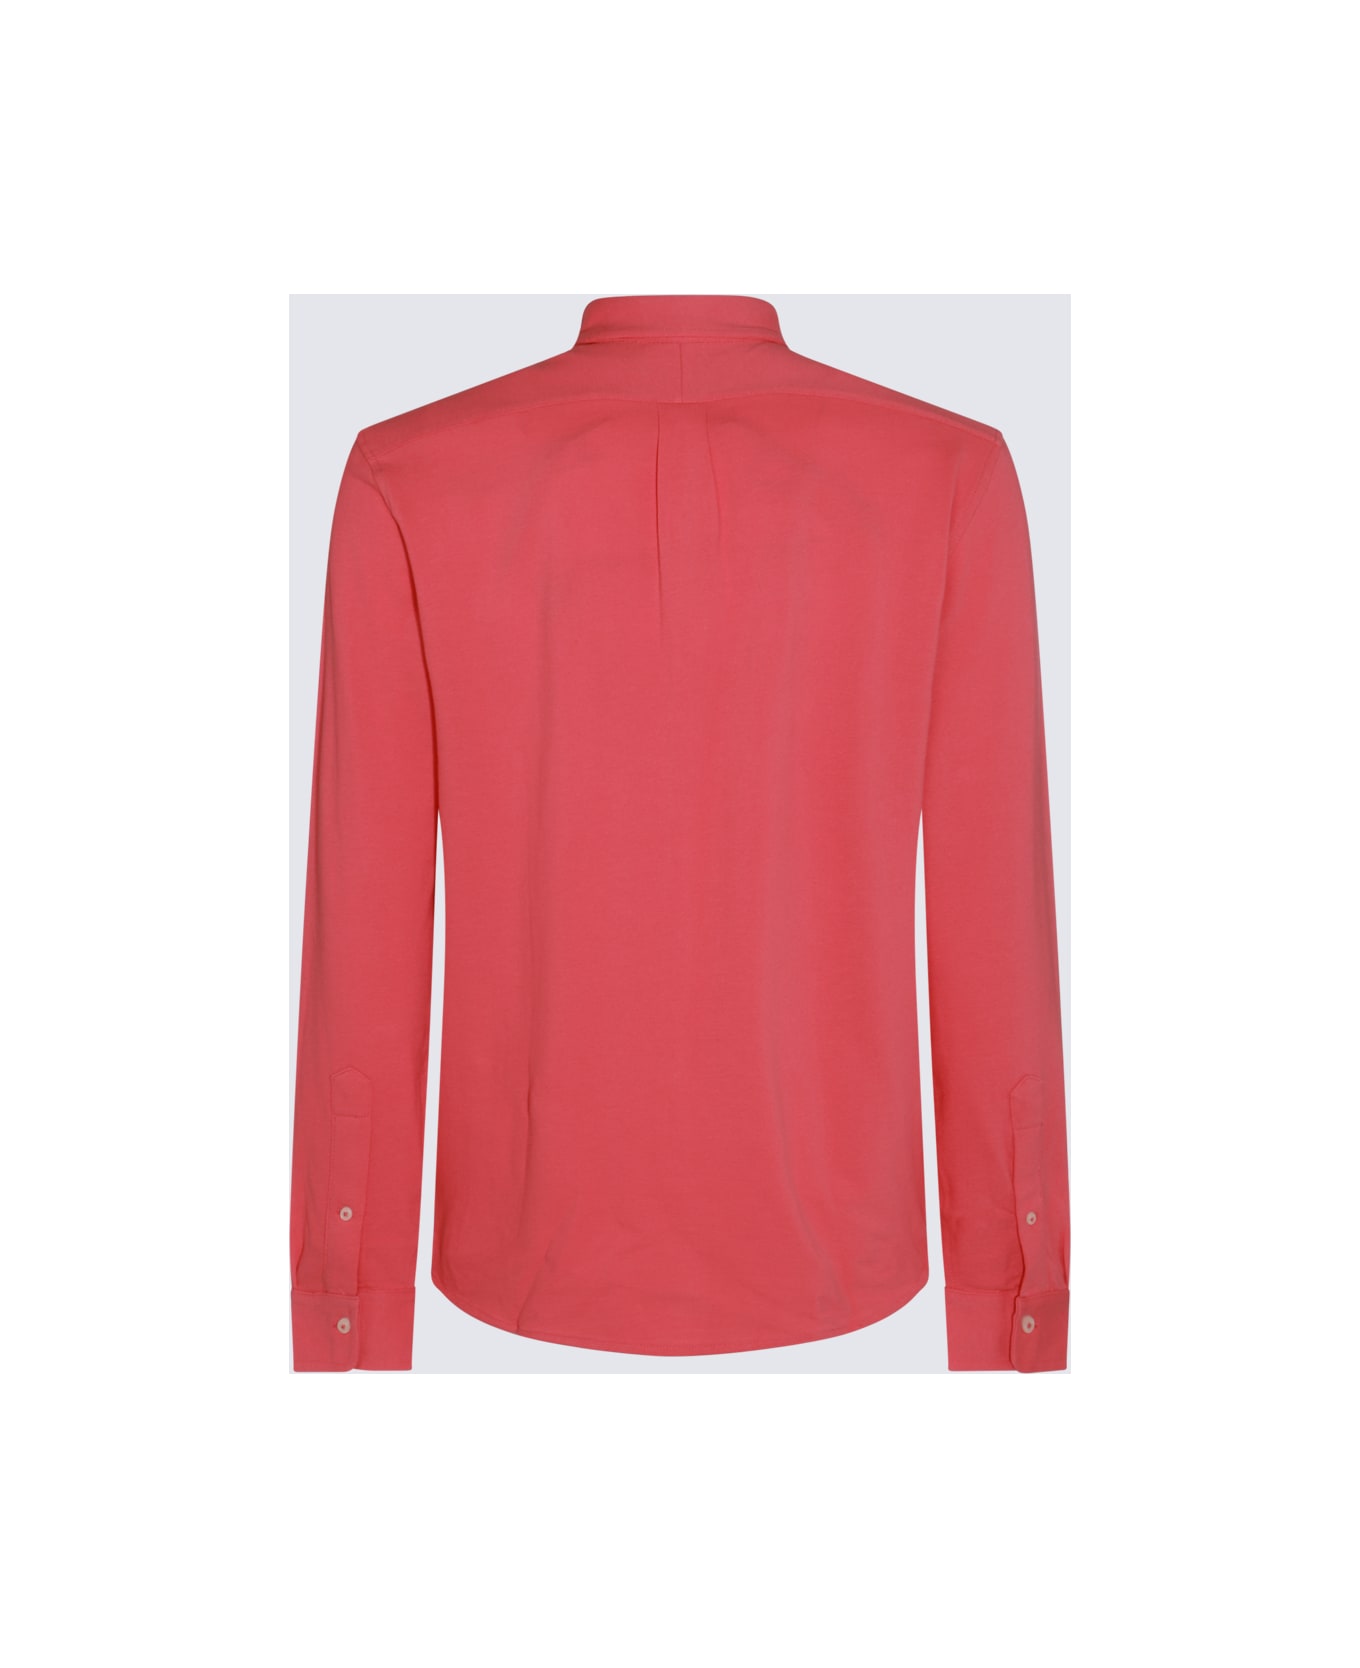 Polo Ralph Lauren Red Cotton Shirt - PALE RED